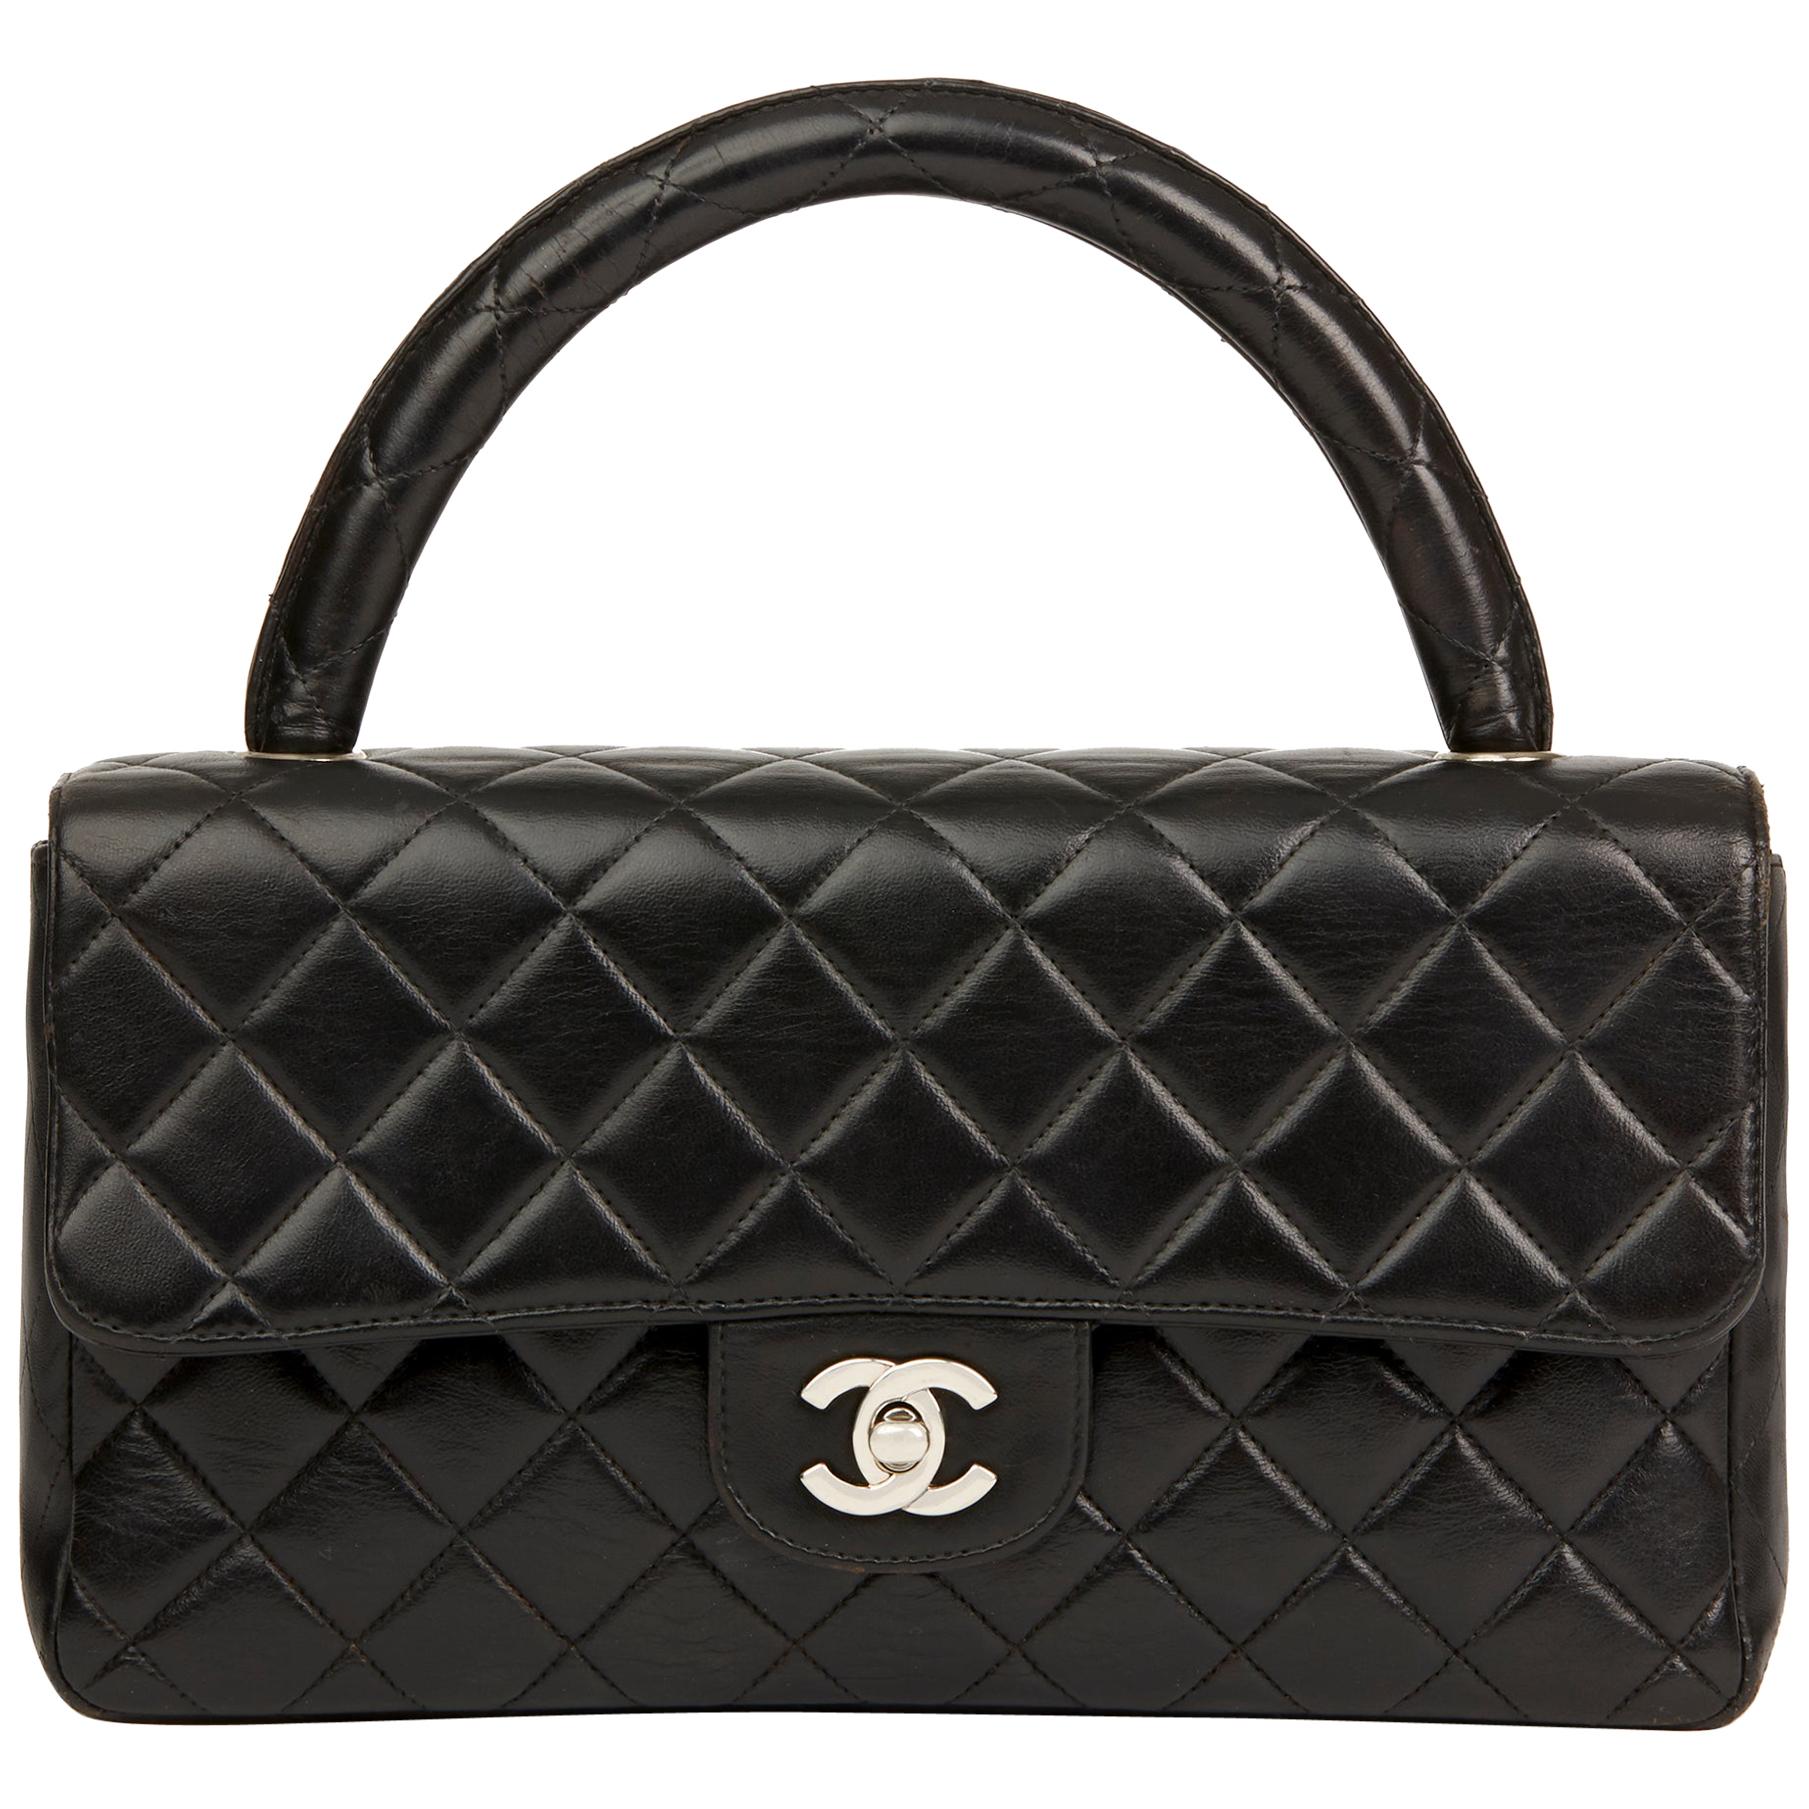 1996 Chanel Black Quilted Lambskin Vintage Medium Classic Kelly Flap Bag